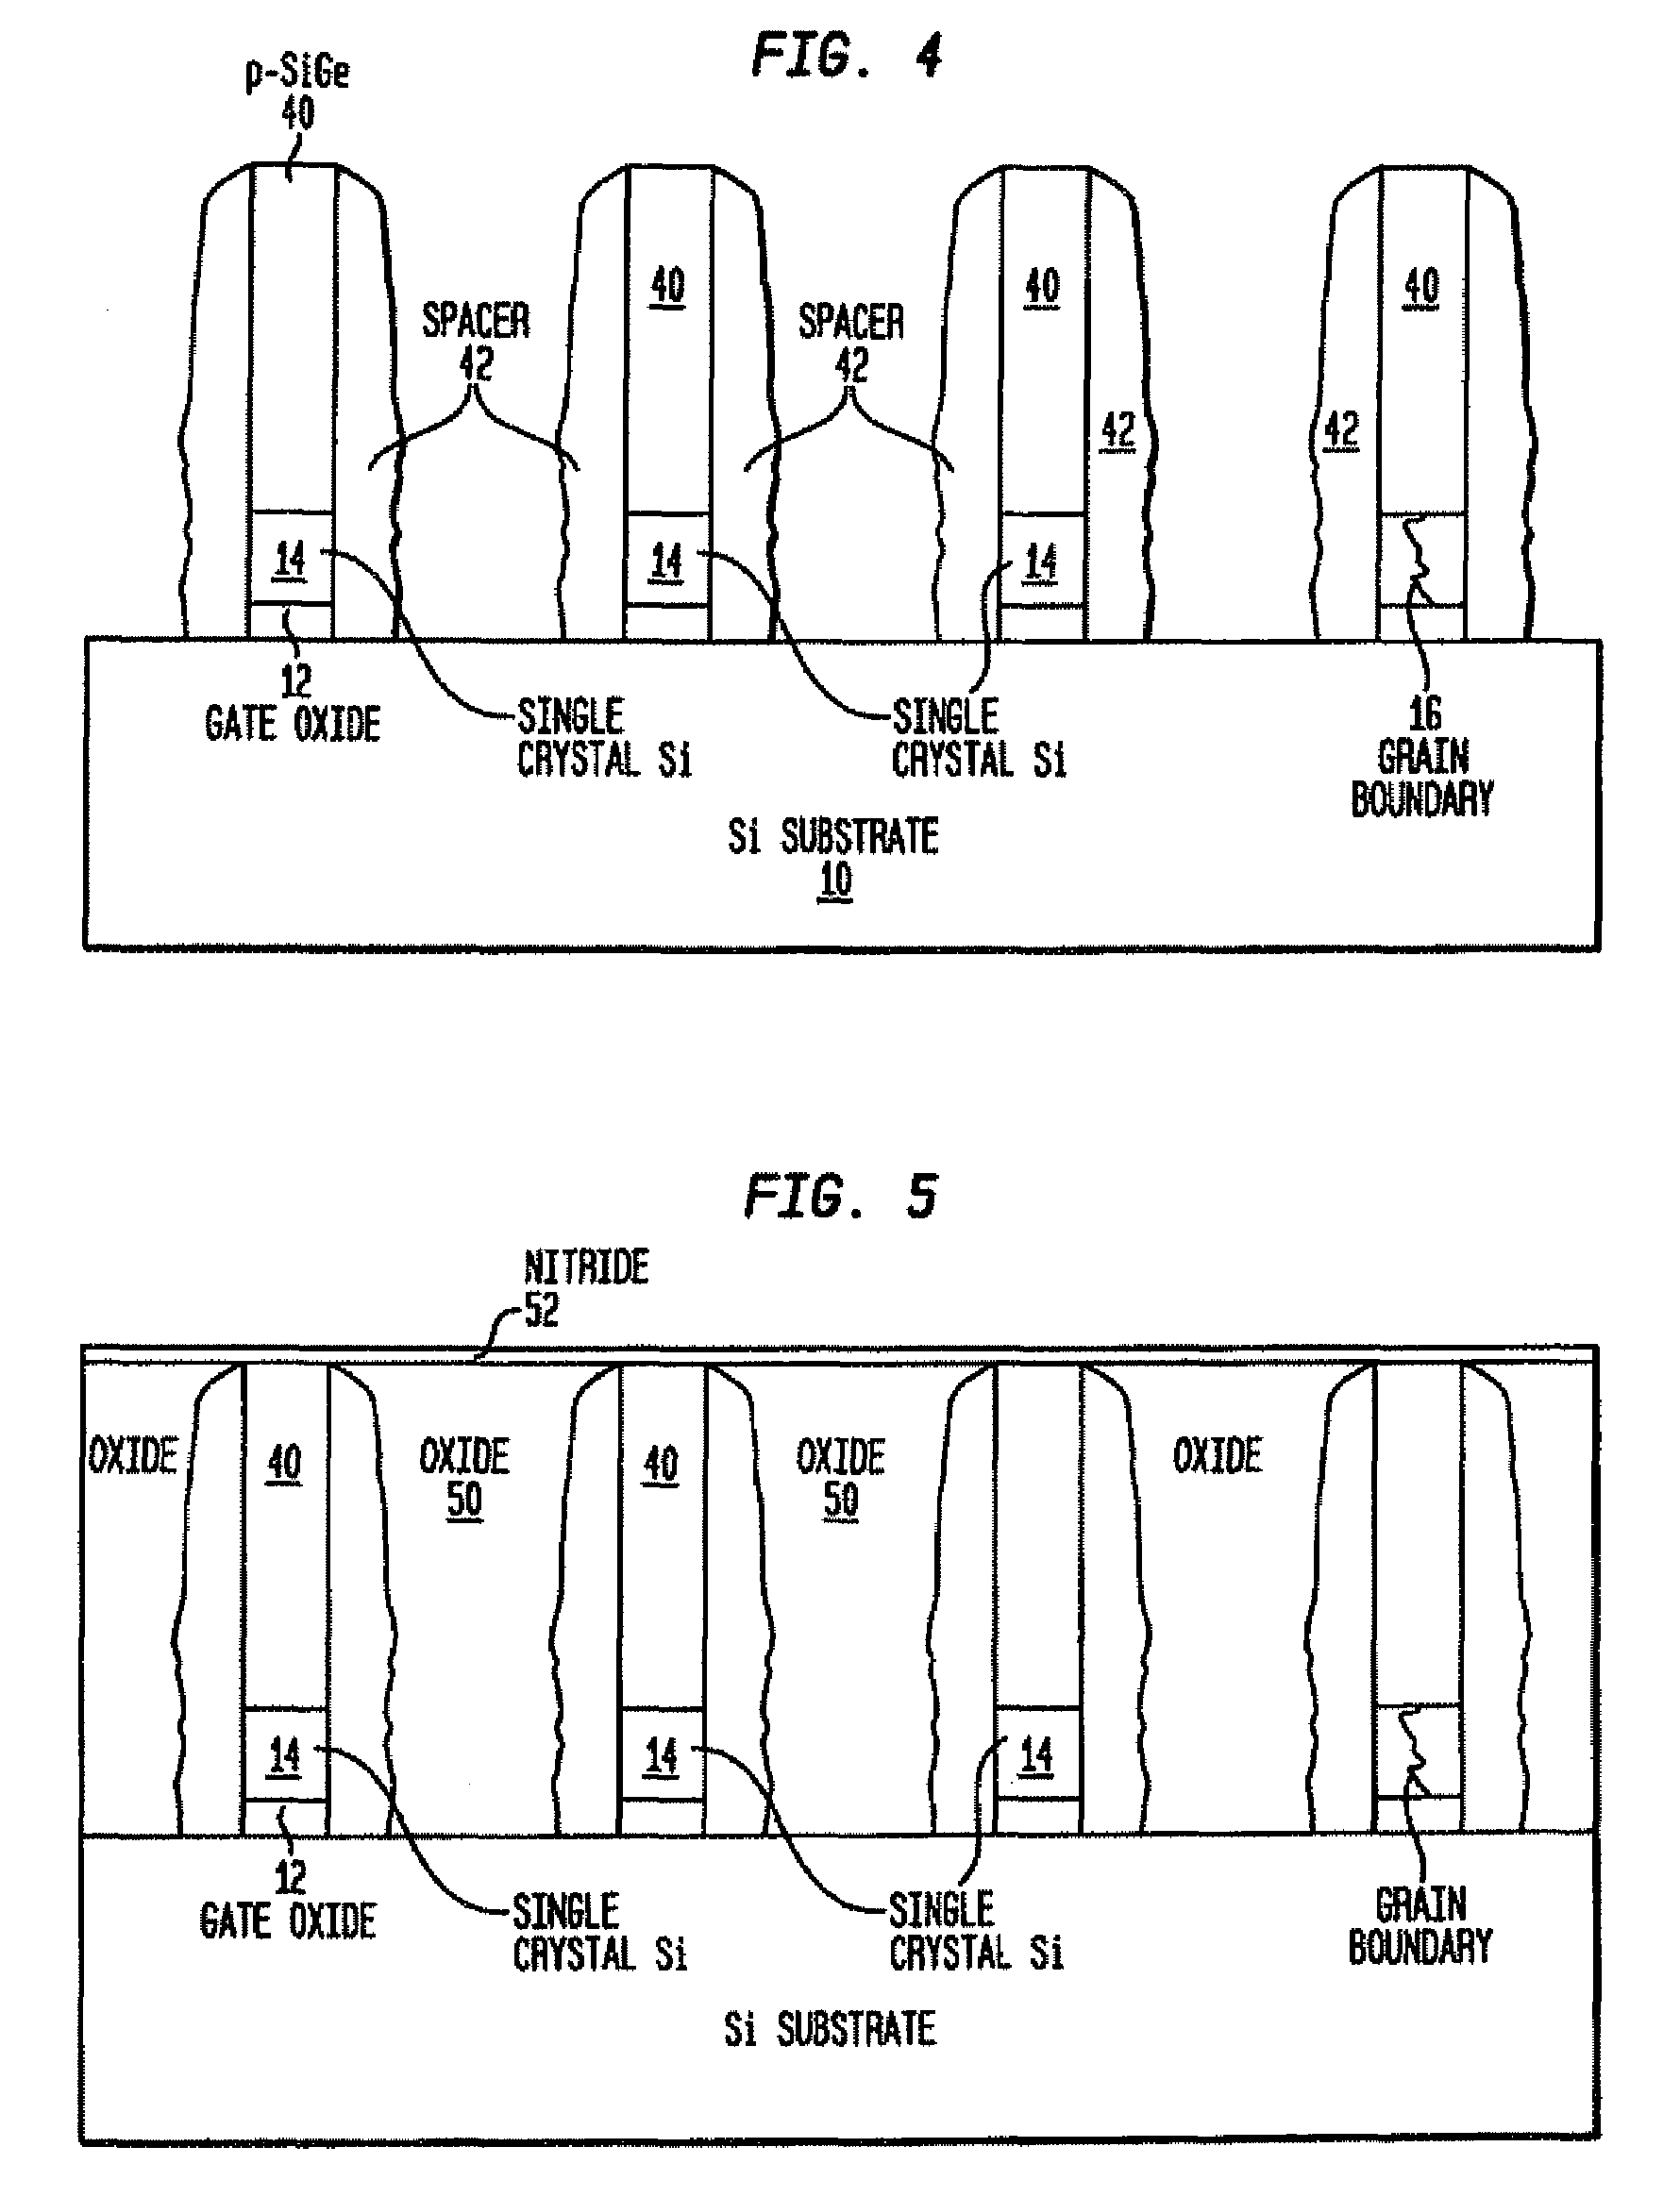 Structures and methods for manufacturing of dislocation free stressed channels in bulk silicon and SOI CMOS devices by gate stress engineering with SiGe and/or Si:C